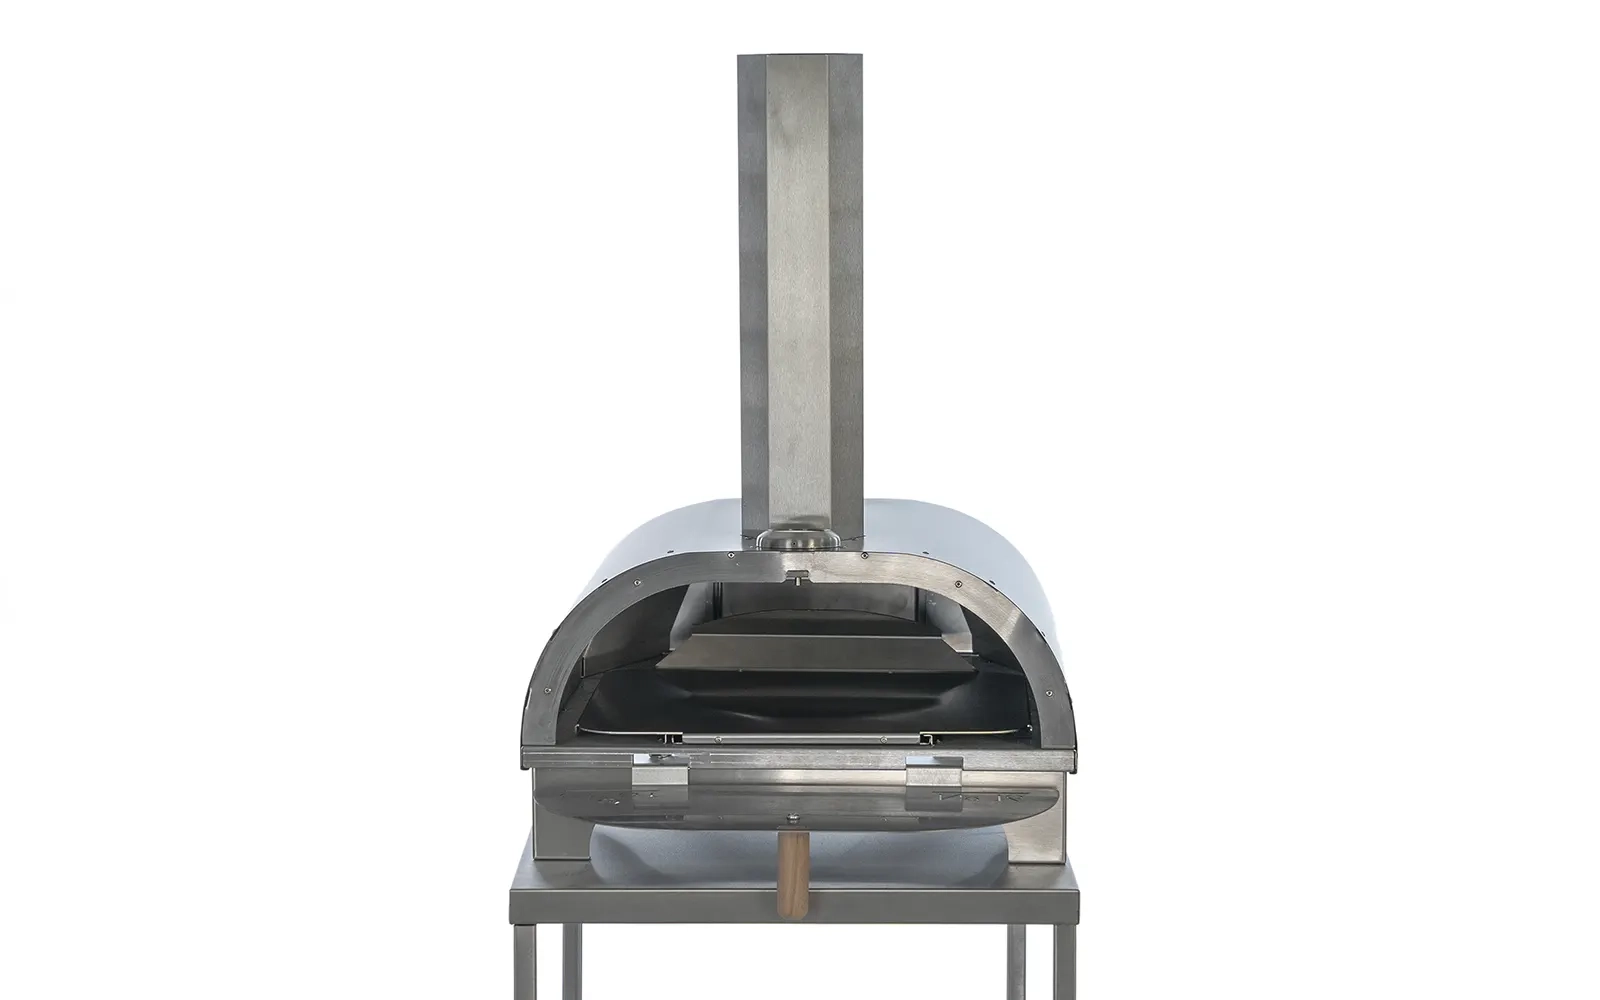 Front of The No.16 pizza oven with the door open against a white background